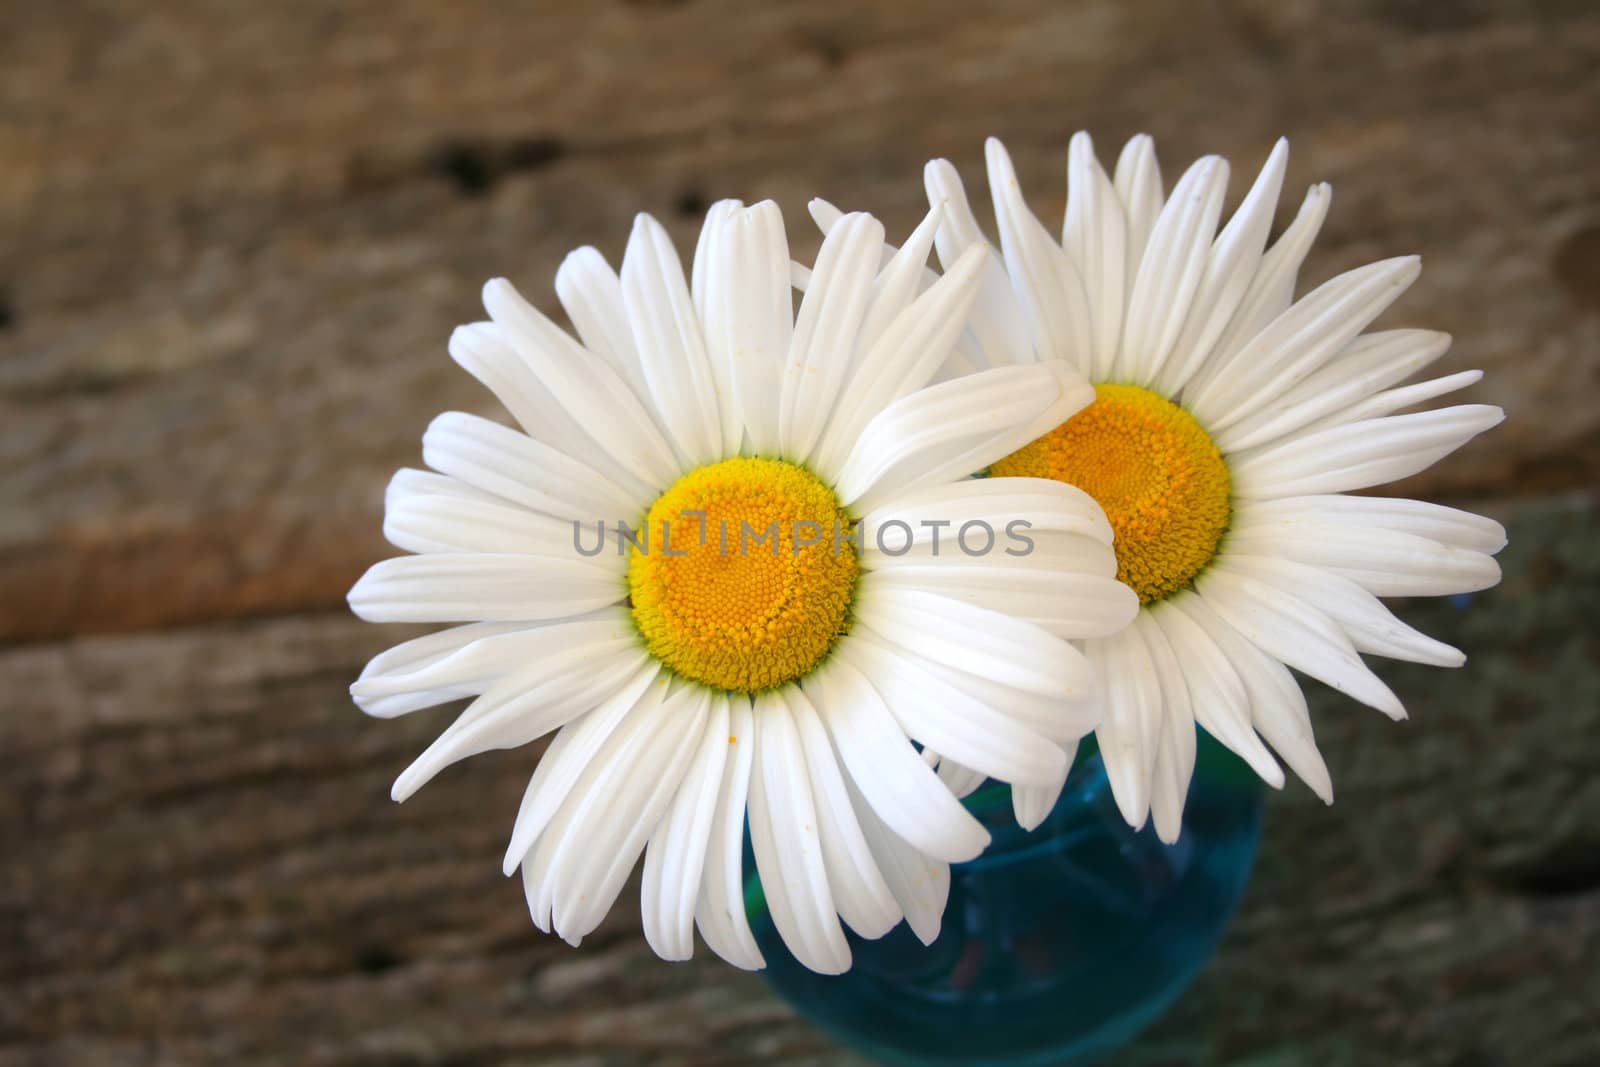 Two daisies in a blue vase with a wood background.